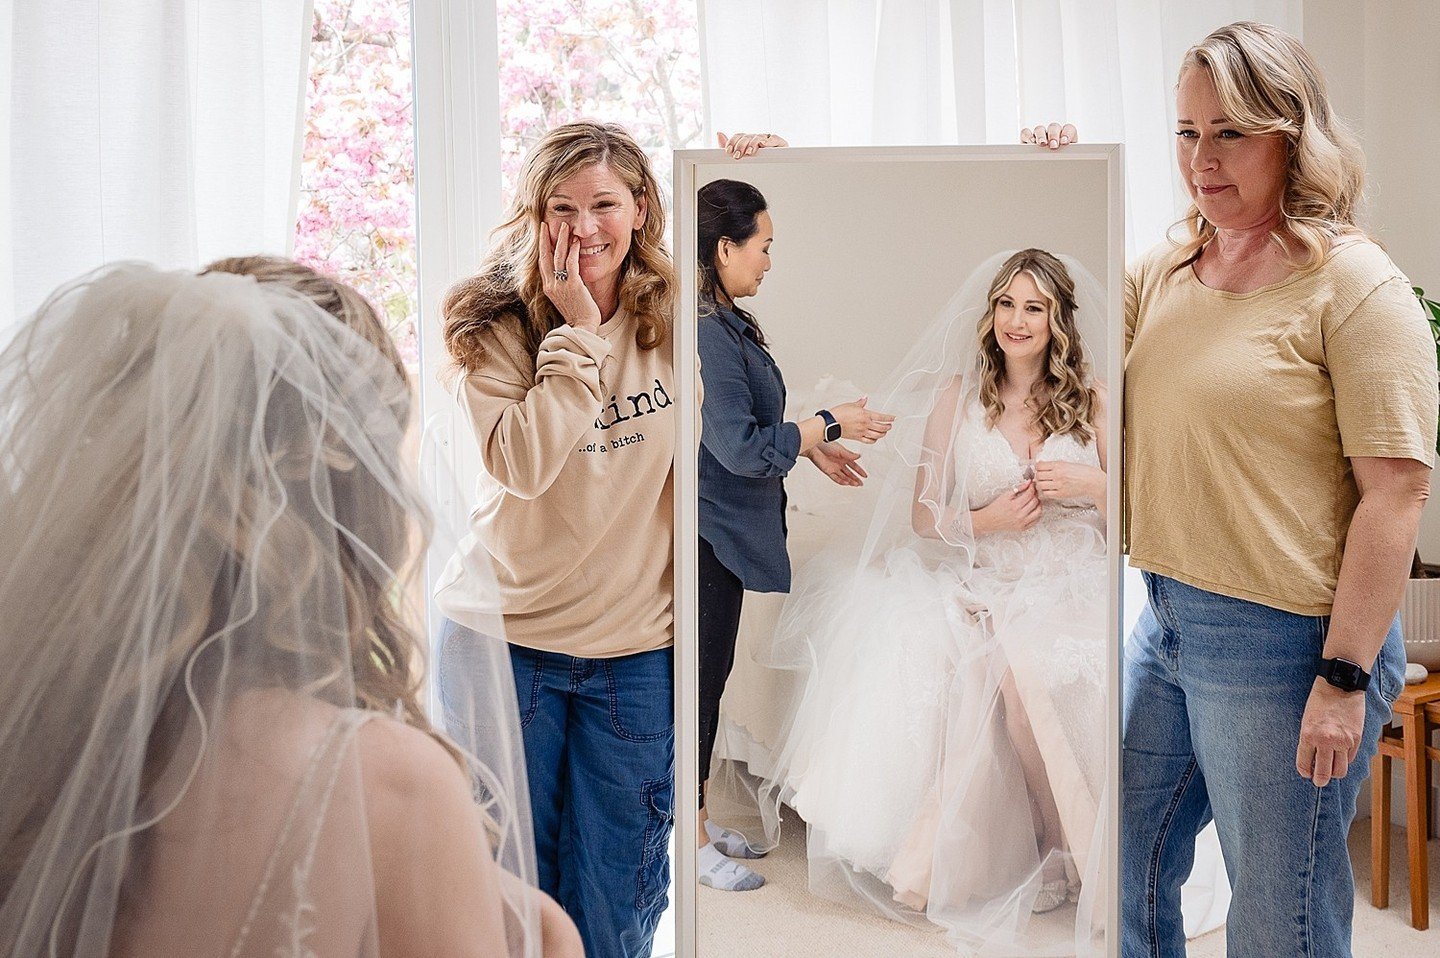 Getting ready to share some photos from Kristina &amp; Gary's wedding . But forst, the sweetest getting ready moment. I dare you to look at these moments without saying &quot;awww.....&quot;

@krisjesp @hartfordgary @shellie_savard @welllovedlife @_e